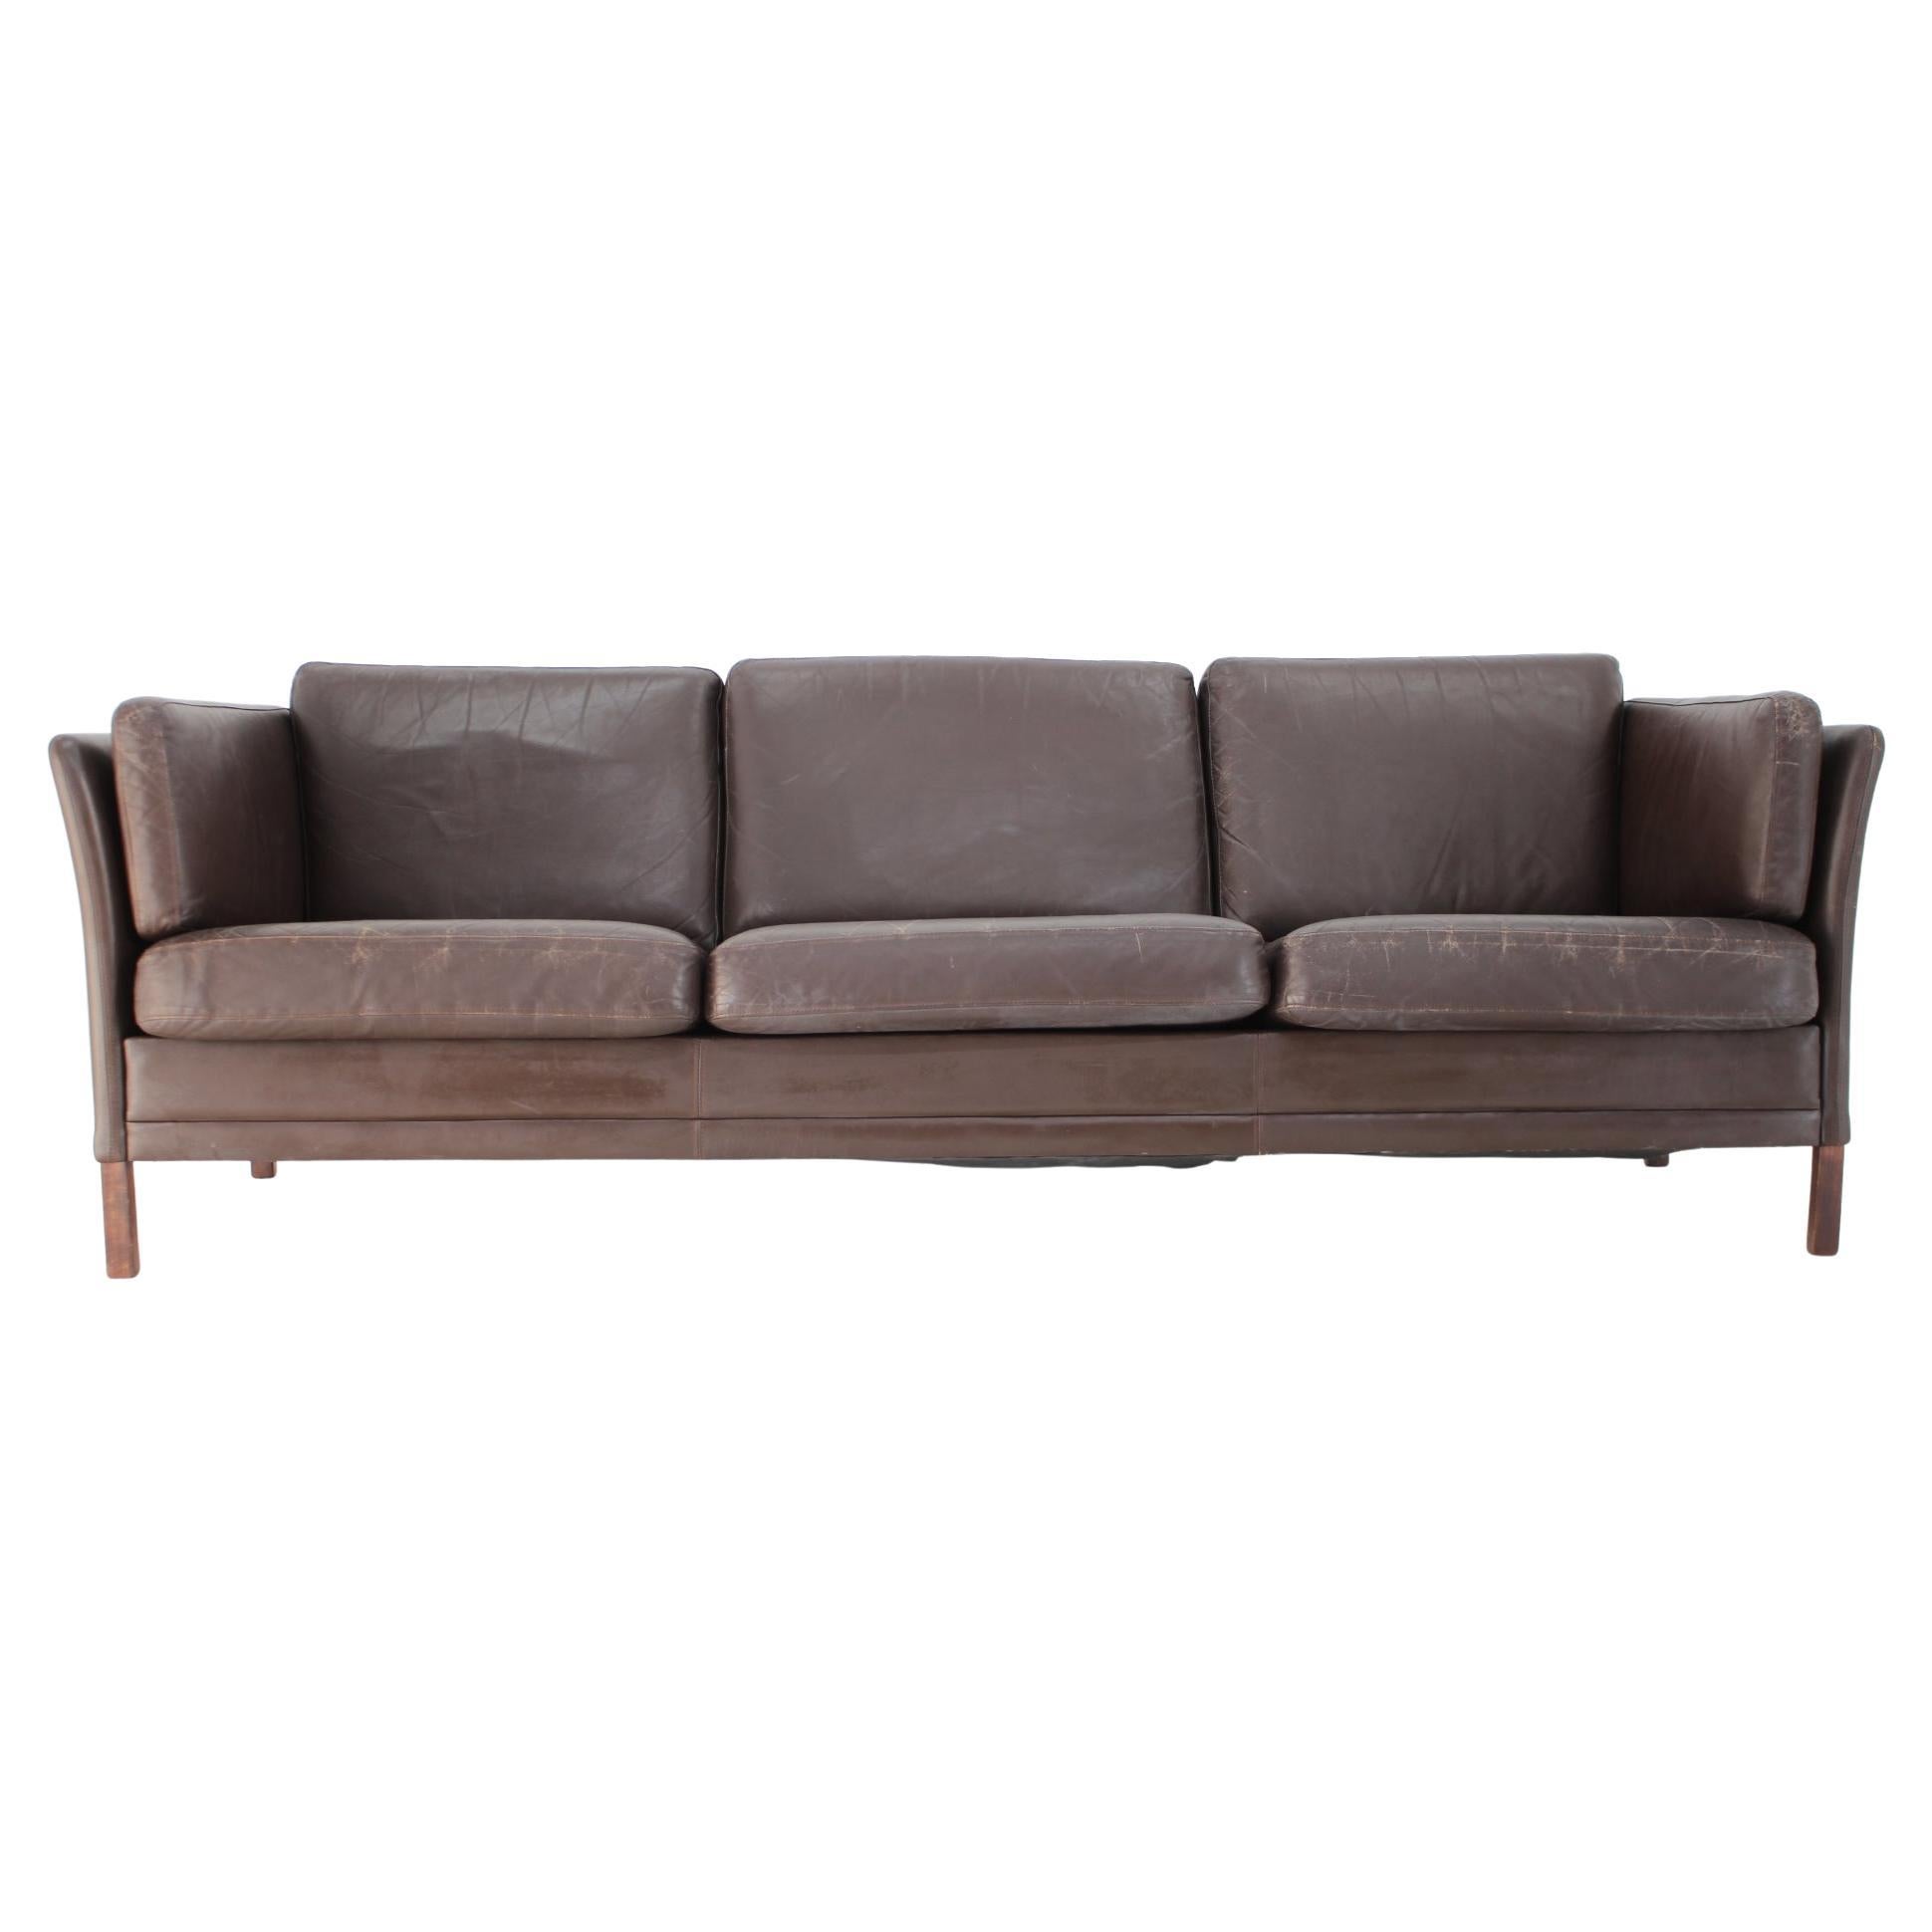 1970s Danish Brown Leather 3-Seater Sofa For Sale